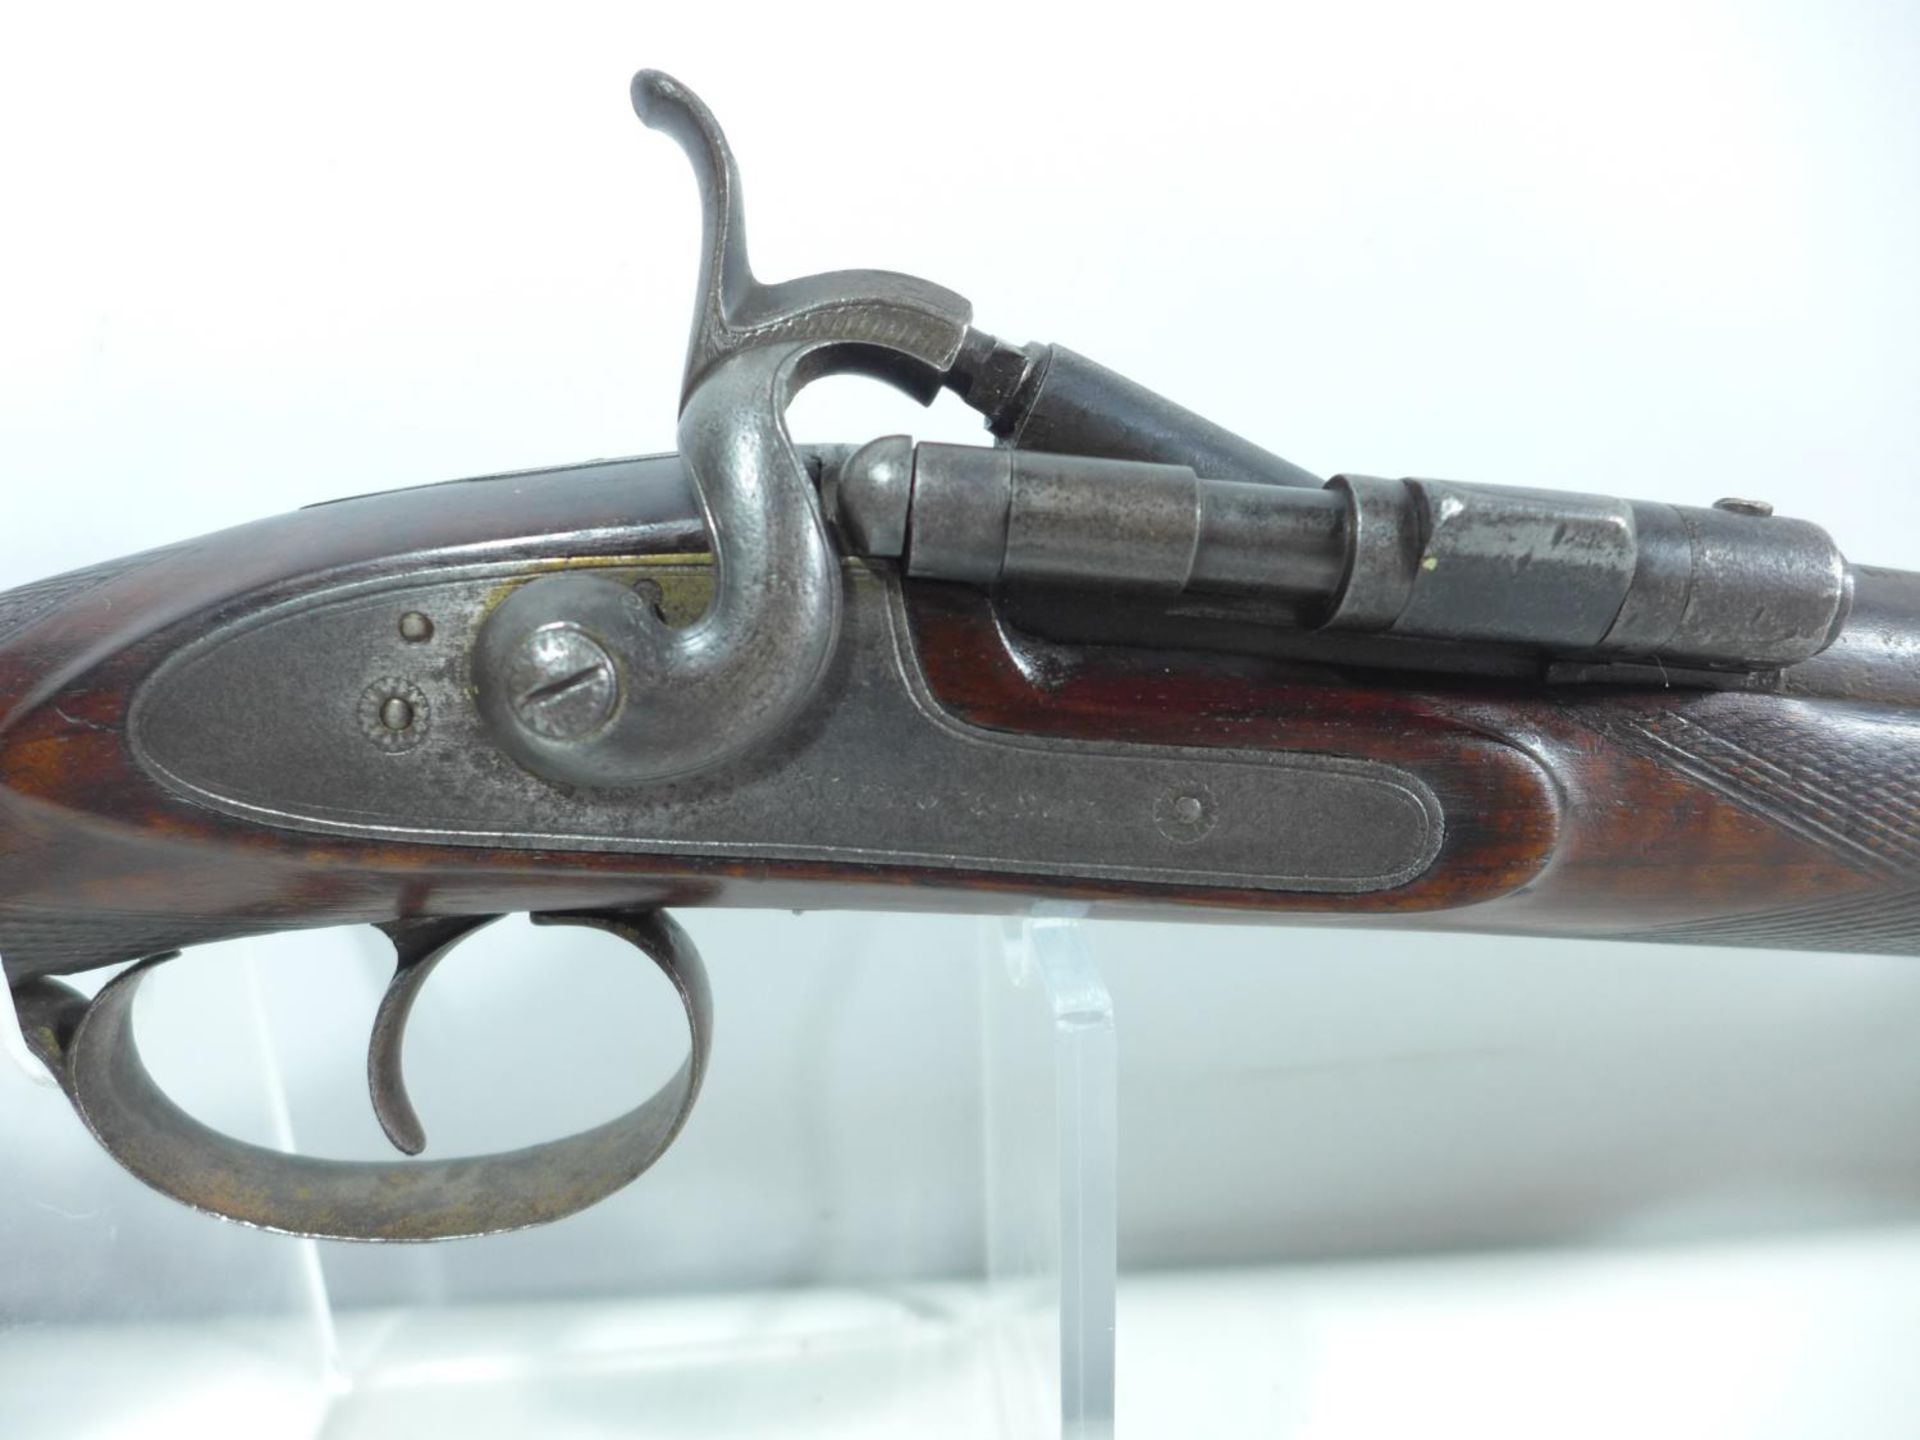 A SNYDER CONVERTED DEACTIVATED SHOTGUN, 79CM BARREL, LOCK MARKED WATSON AND SON, LENGTH 127CM - Image 3 of 8